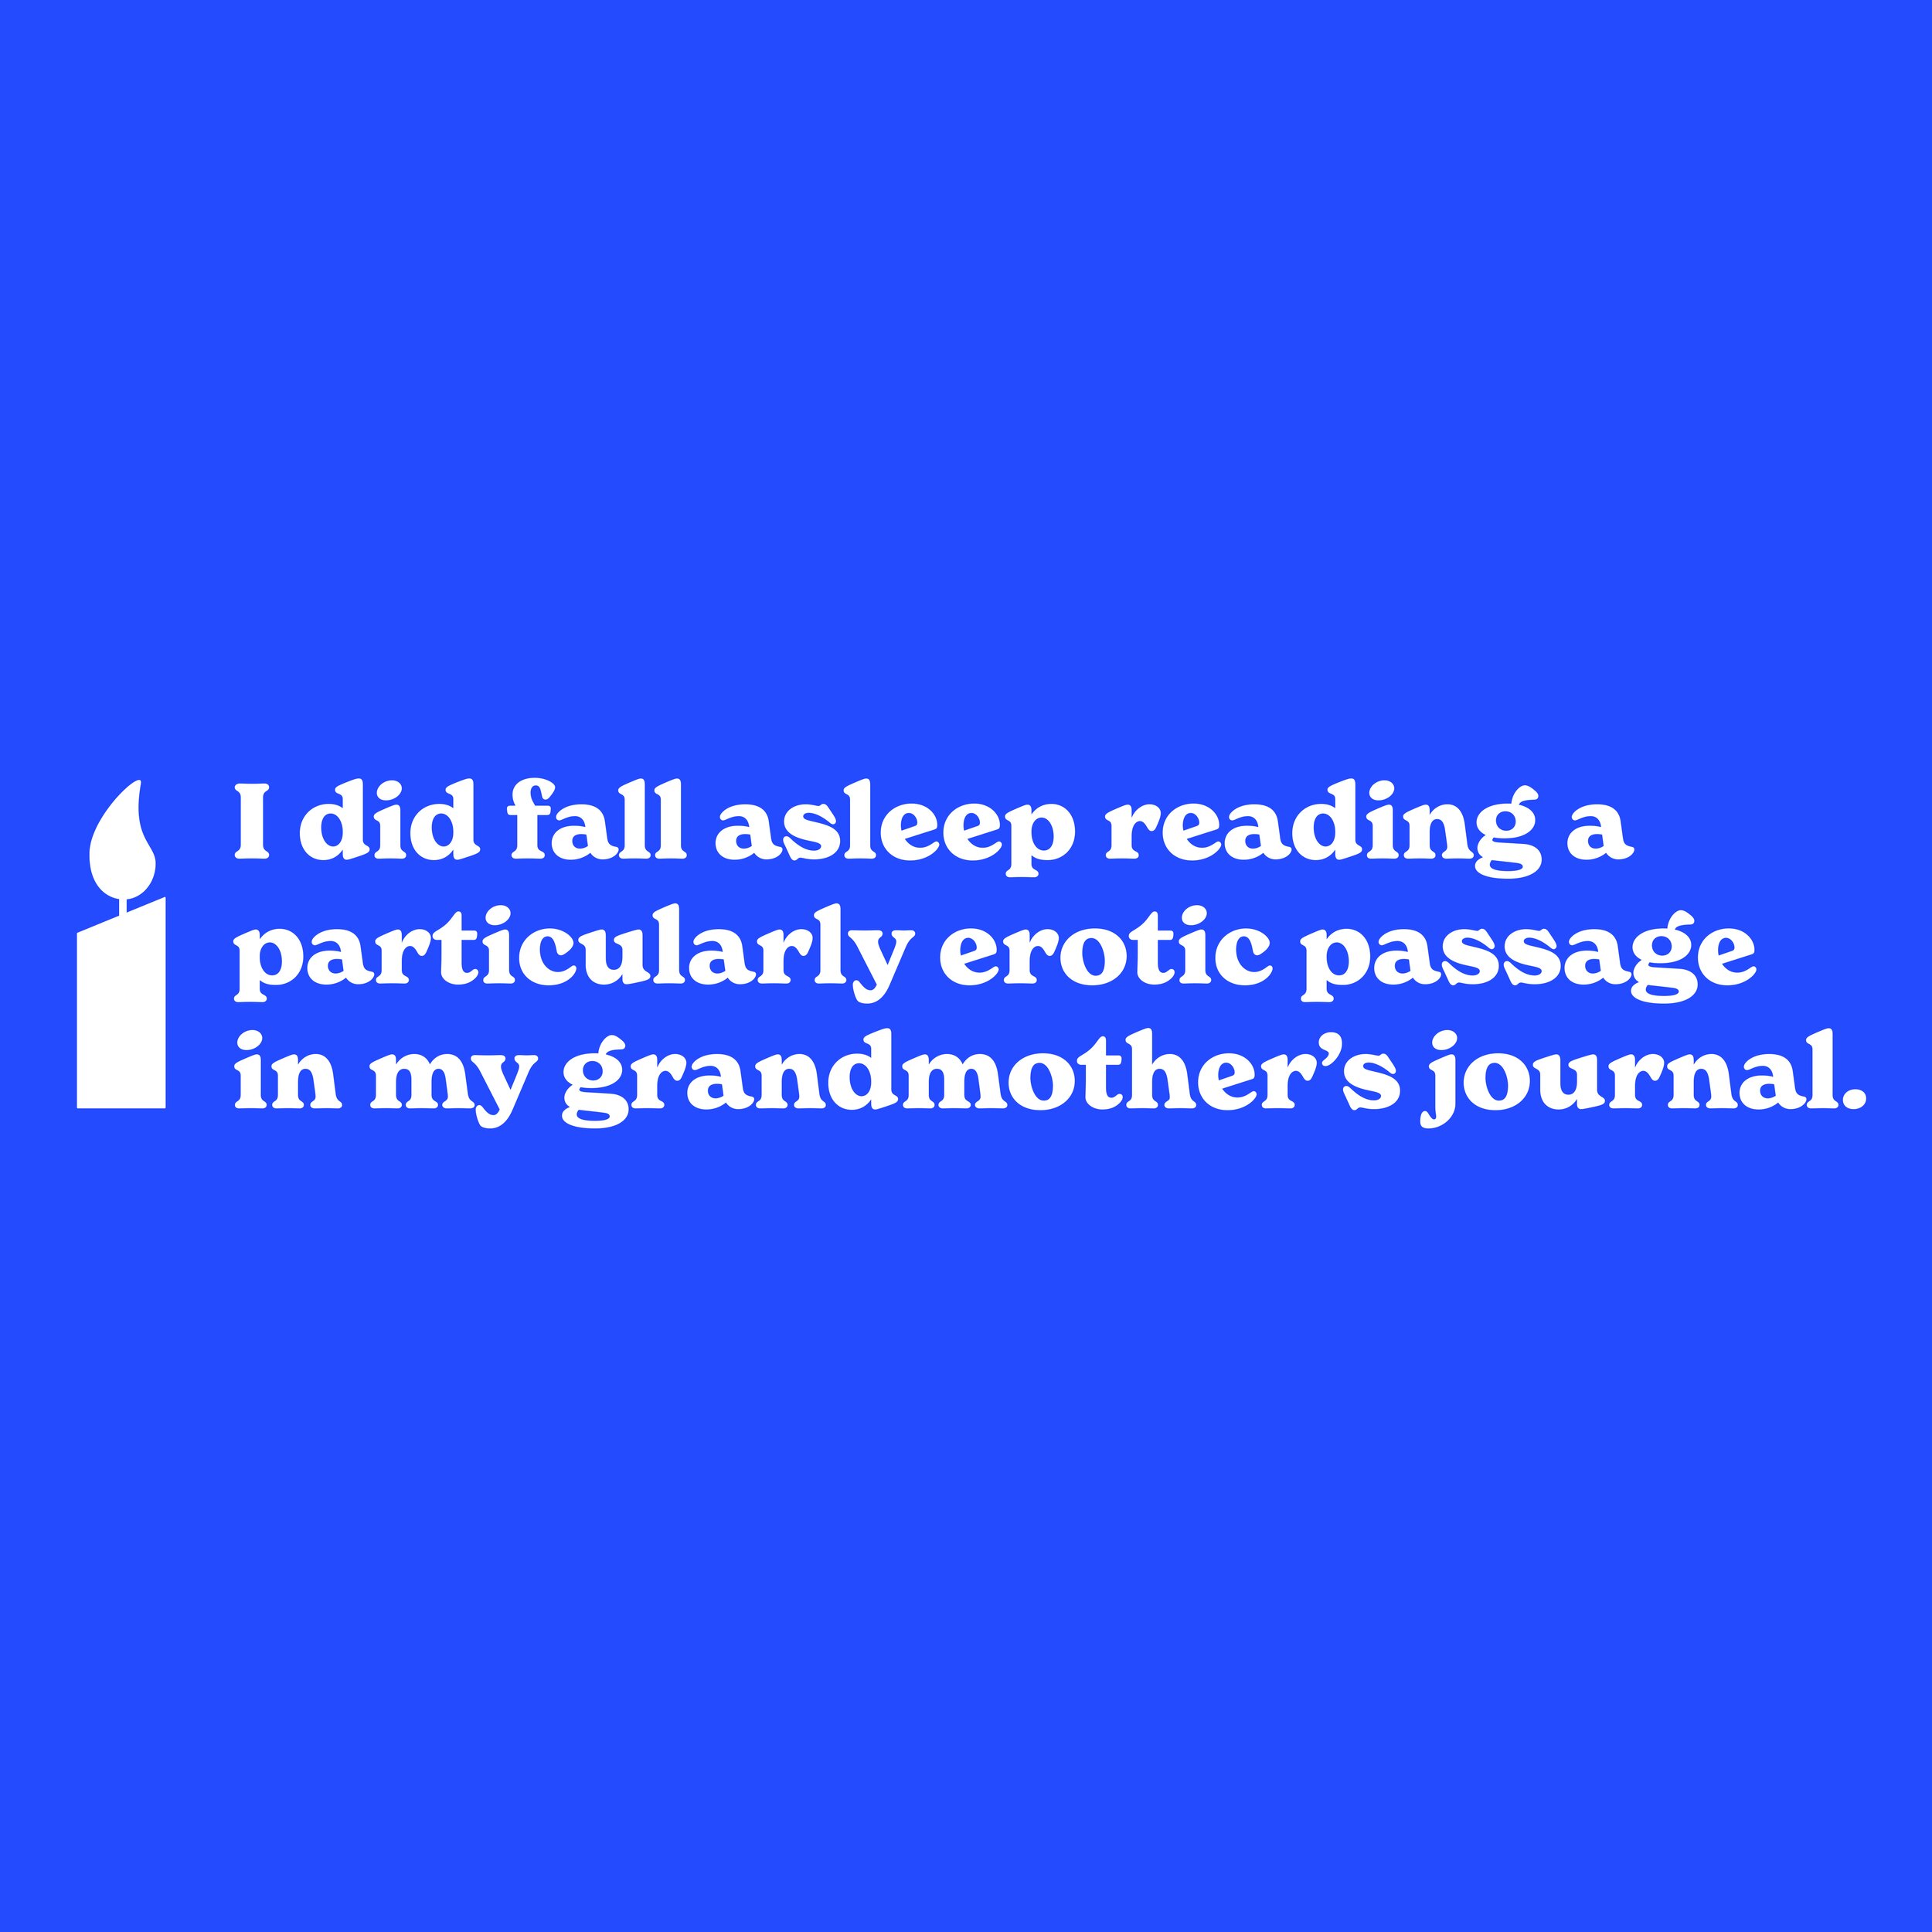 I did fall asleep reading a particularly erotic passage in my grandmother's journal